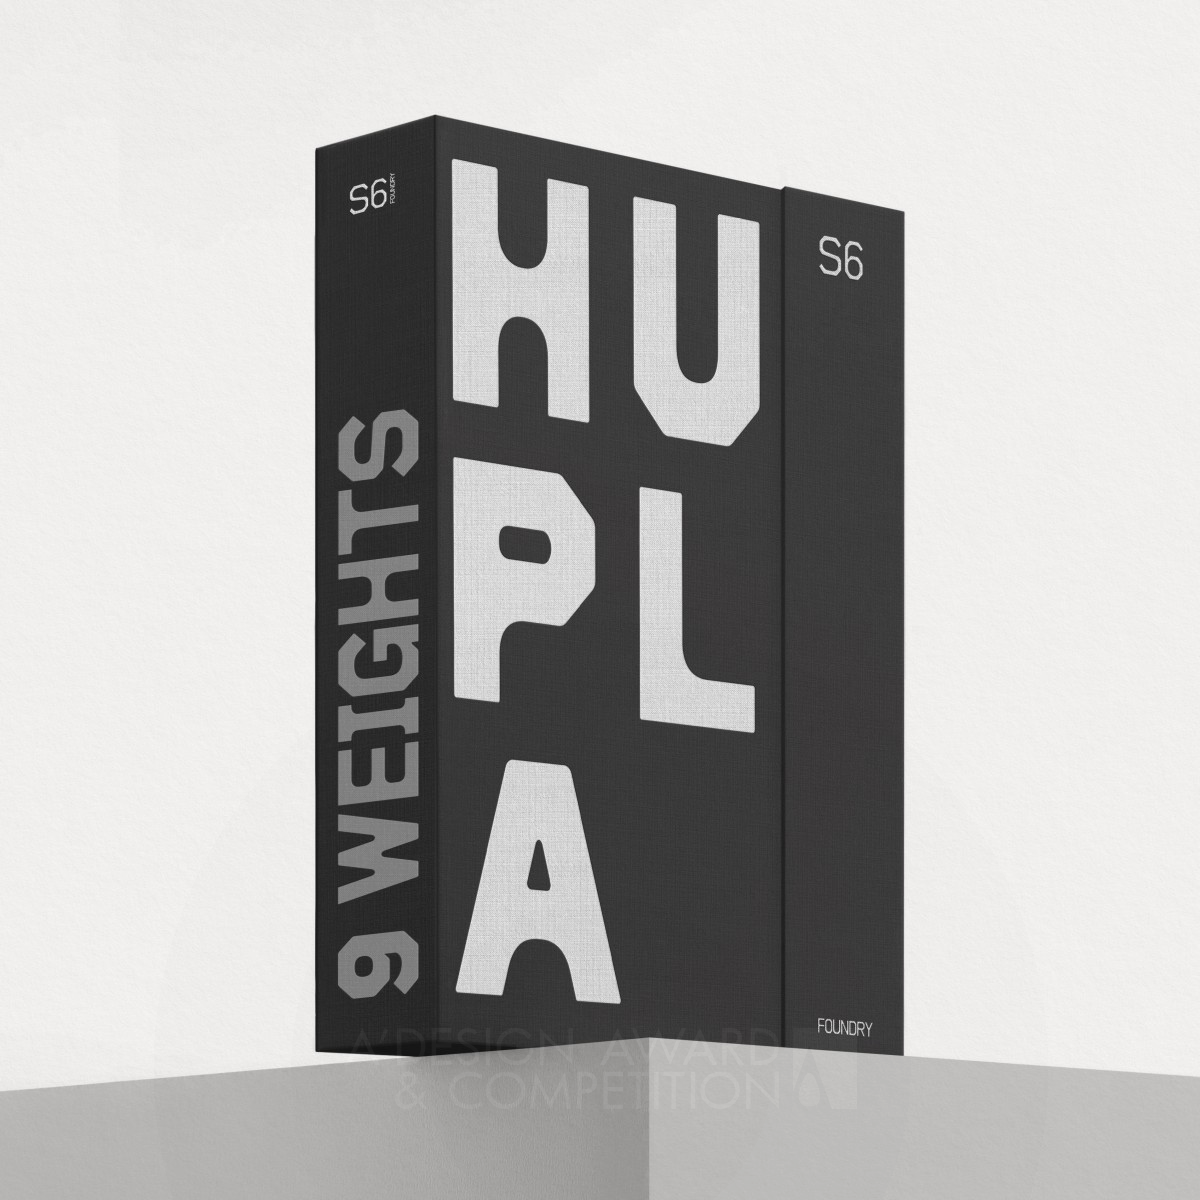 Hupla Typeface Type Design And Type Specimen by Paul Robb